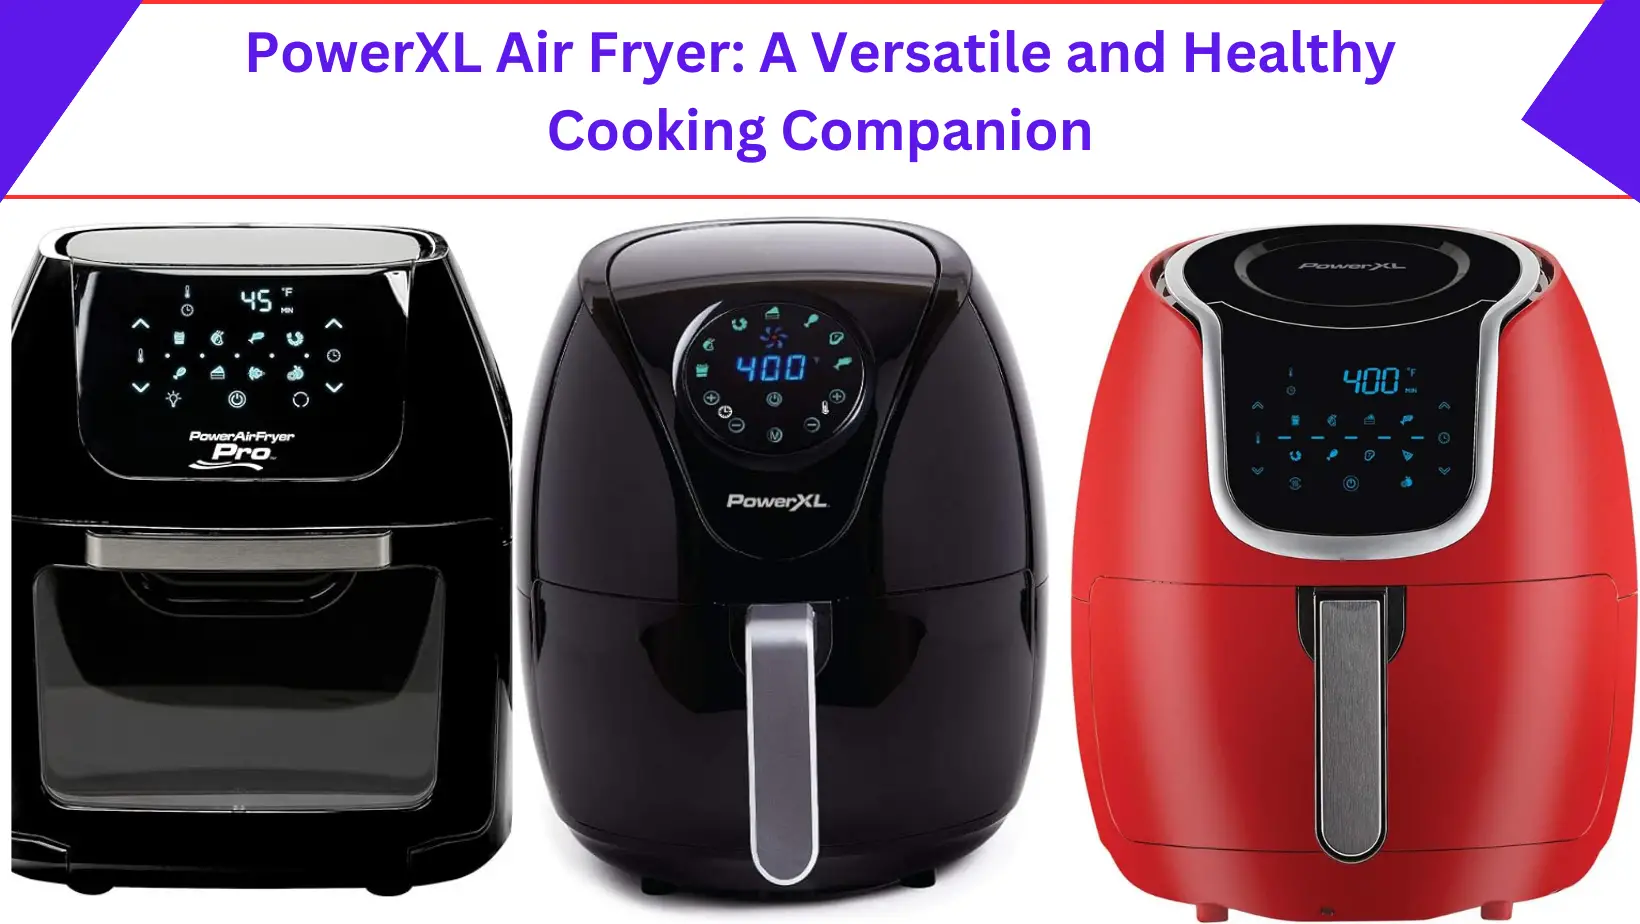 PowerXL Air Fryer: A Versatile and Healthy Cooking Companion